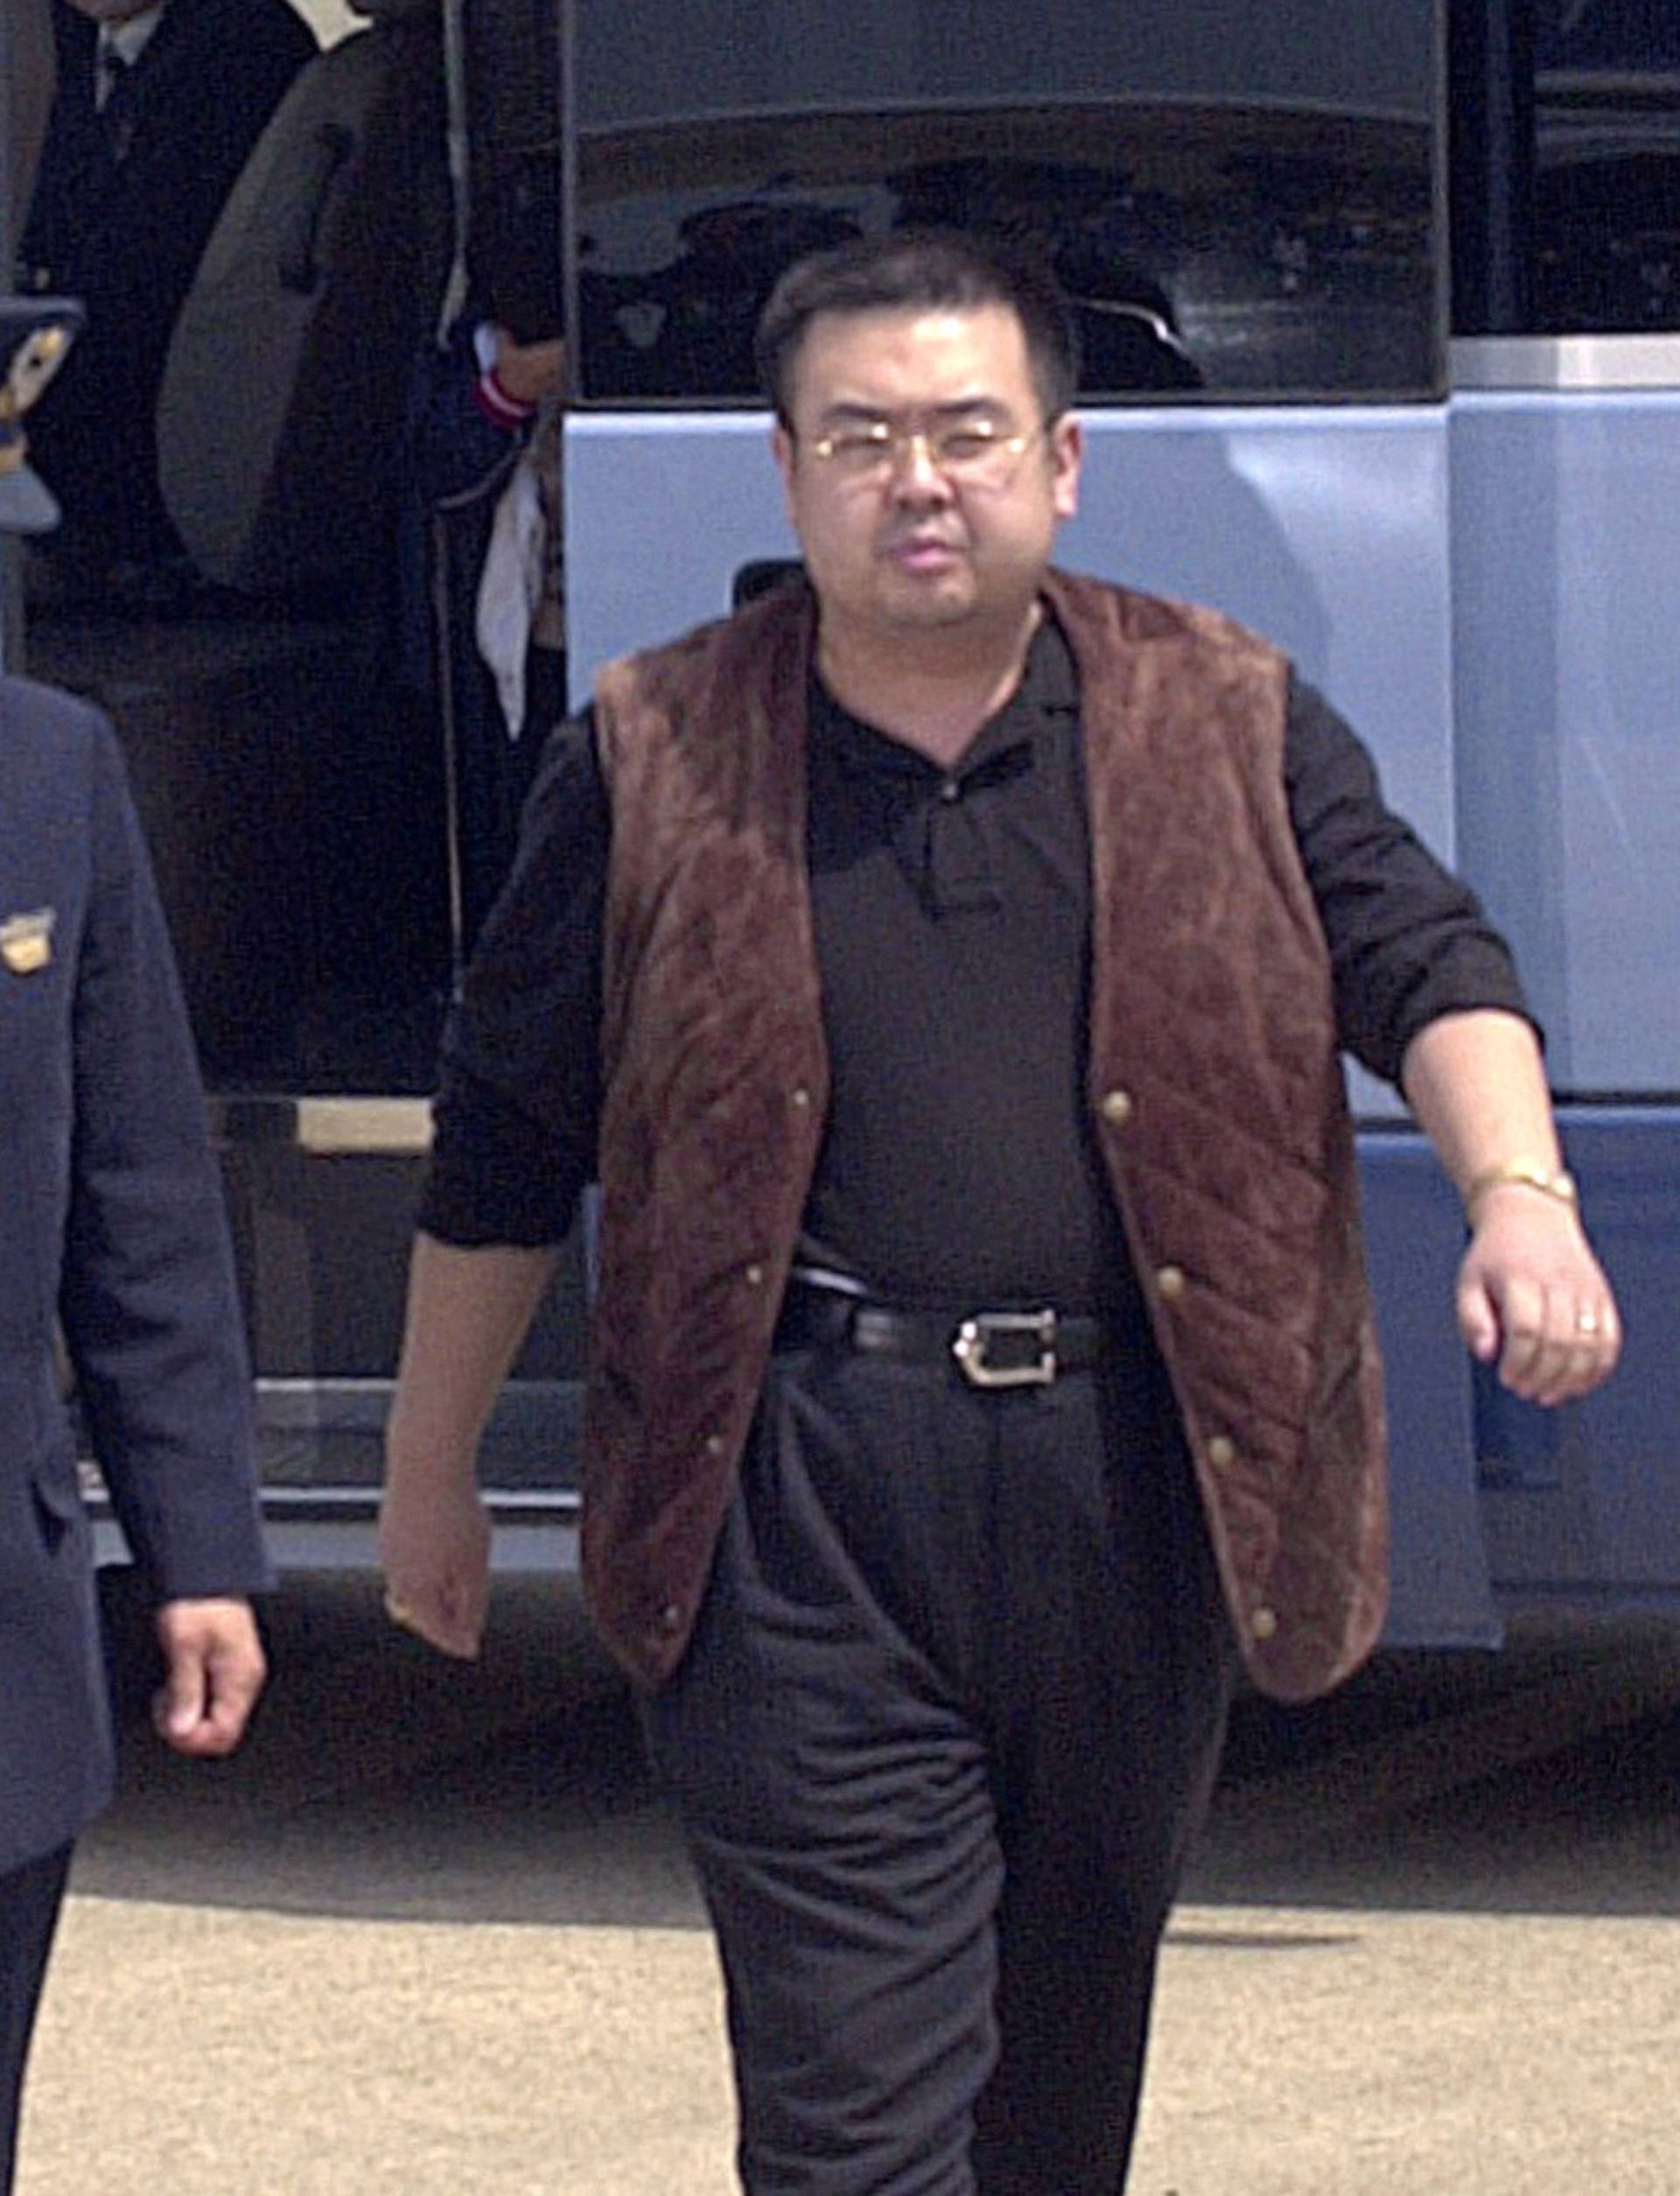 A man believed to be North Korean heir-apparent Kim Jong Nam is escorted by police as he boards a plane upon his deportation from Japan at Tokyo's Narita international airport in Narita, Japan